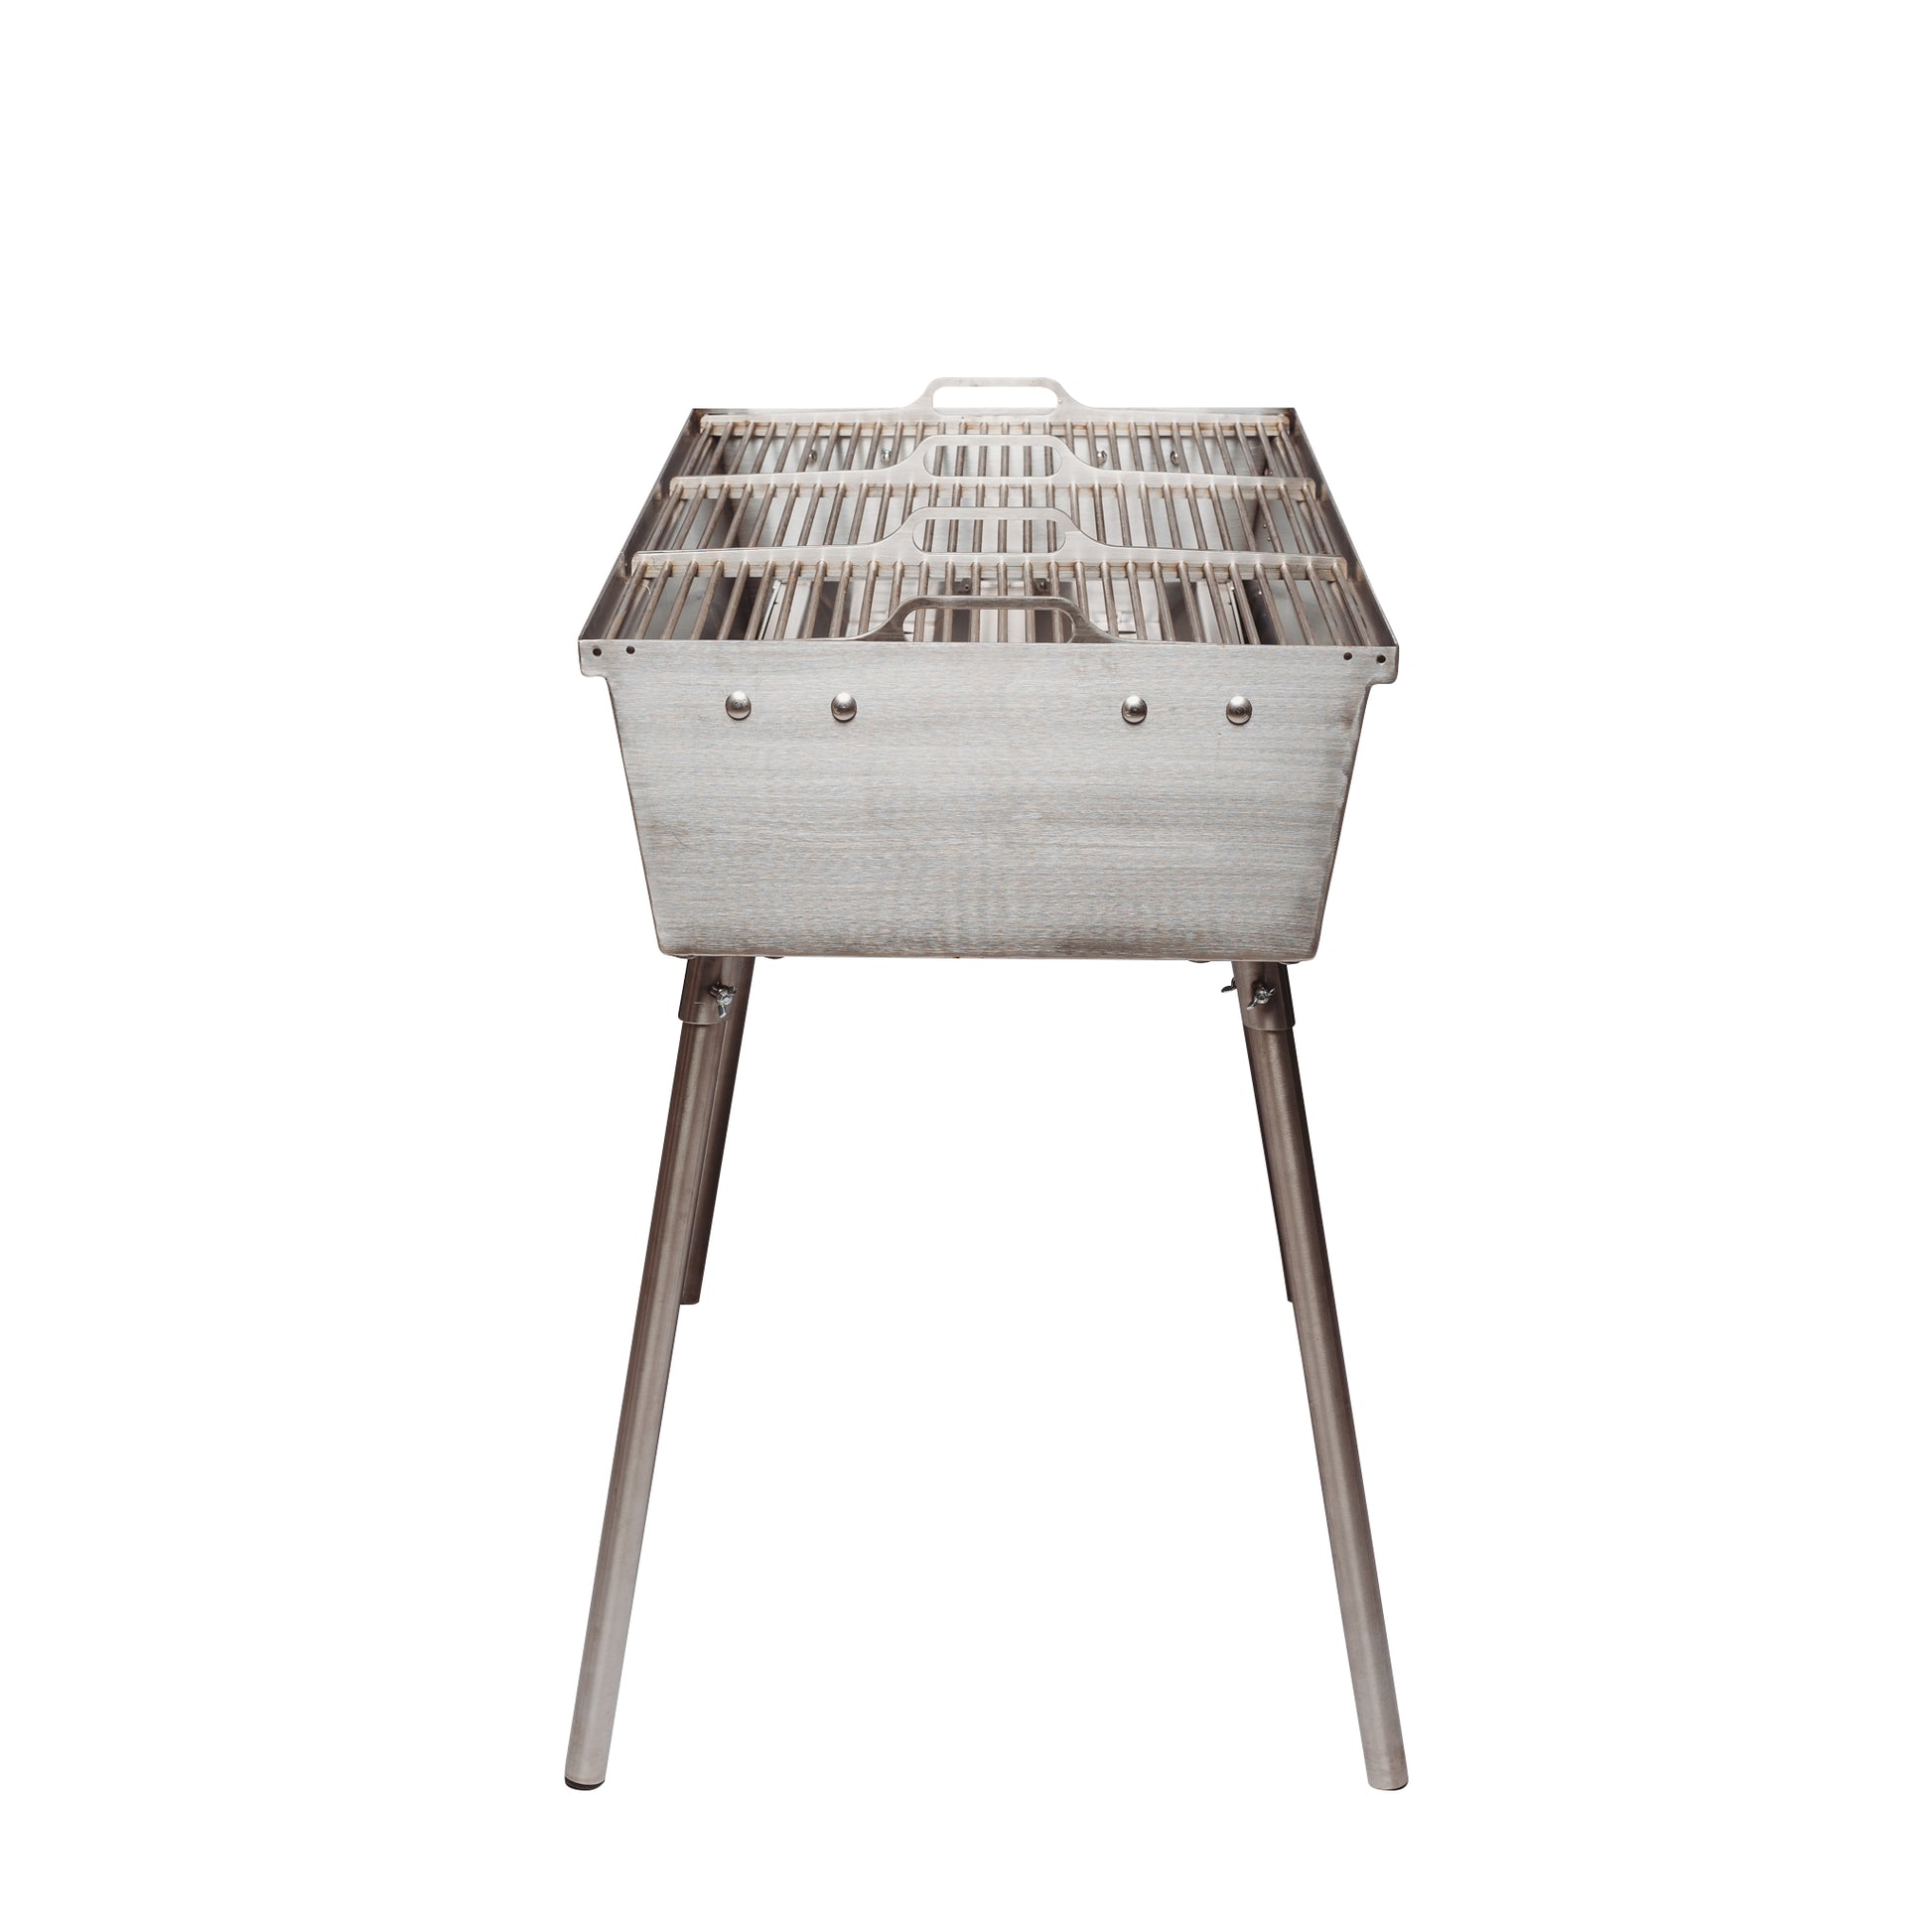 Grill Symbol - Charcoal Grill Chef XXL Silver - Timeout Gardens